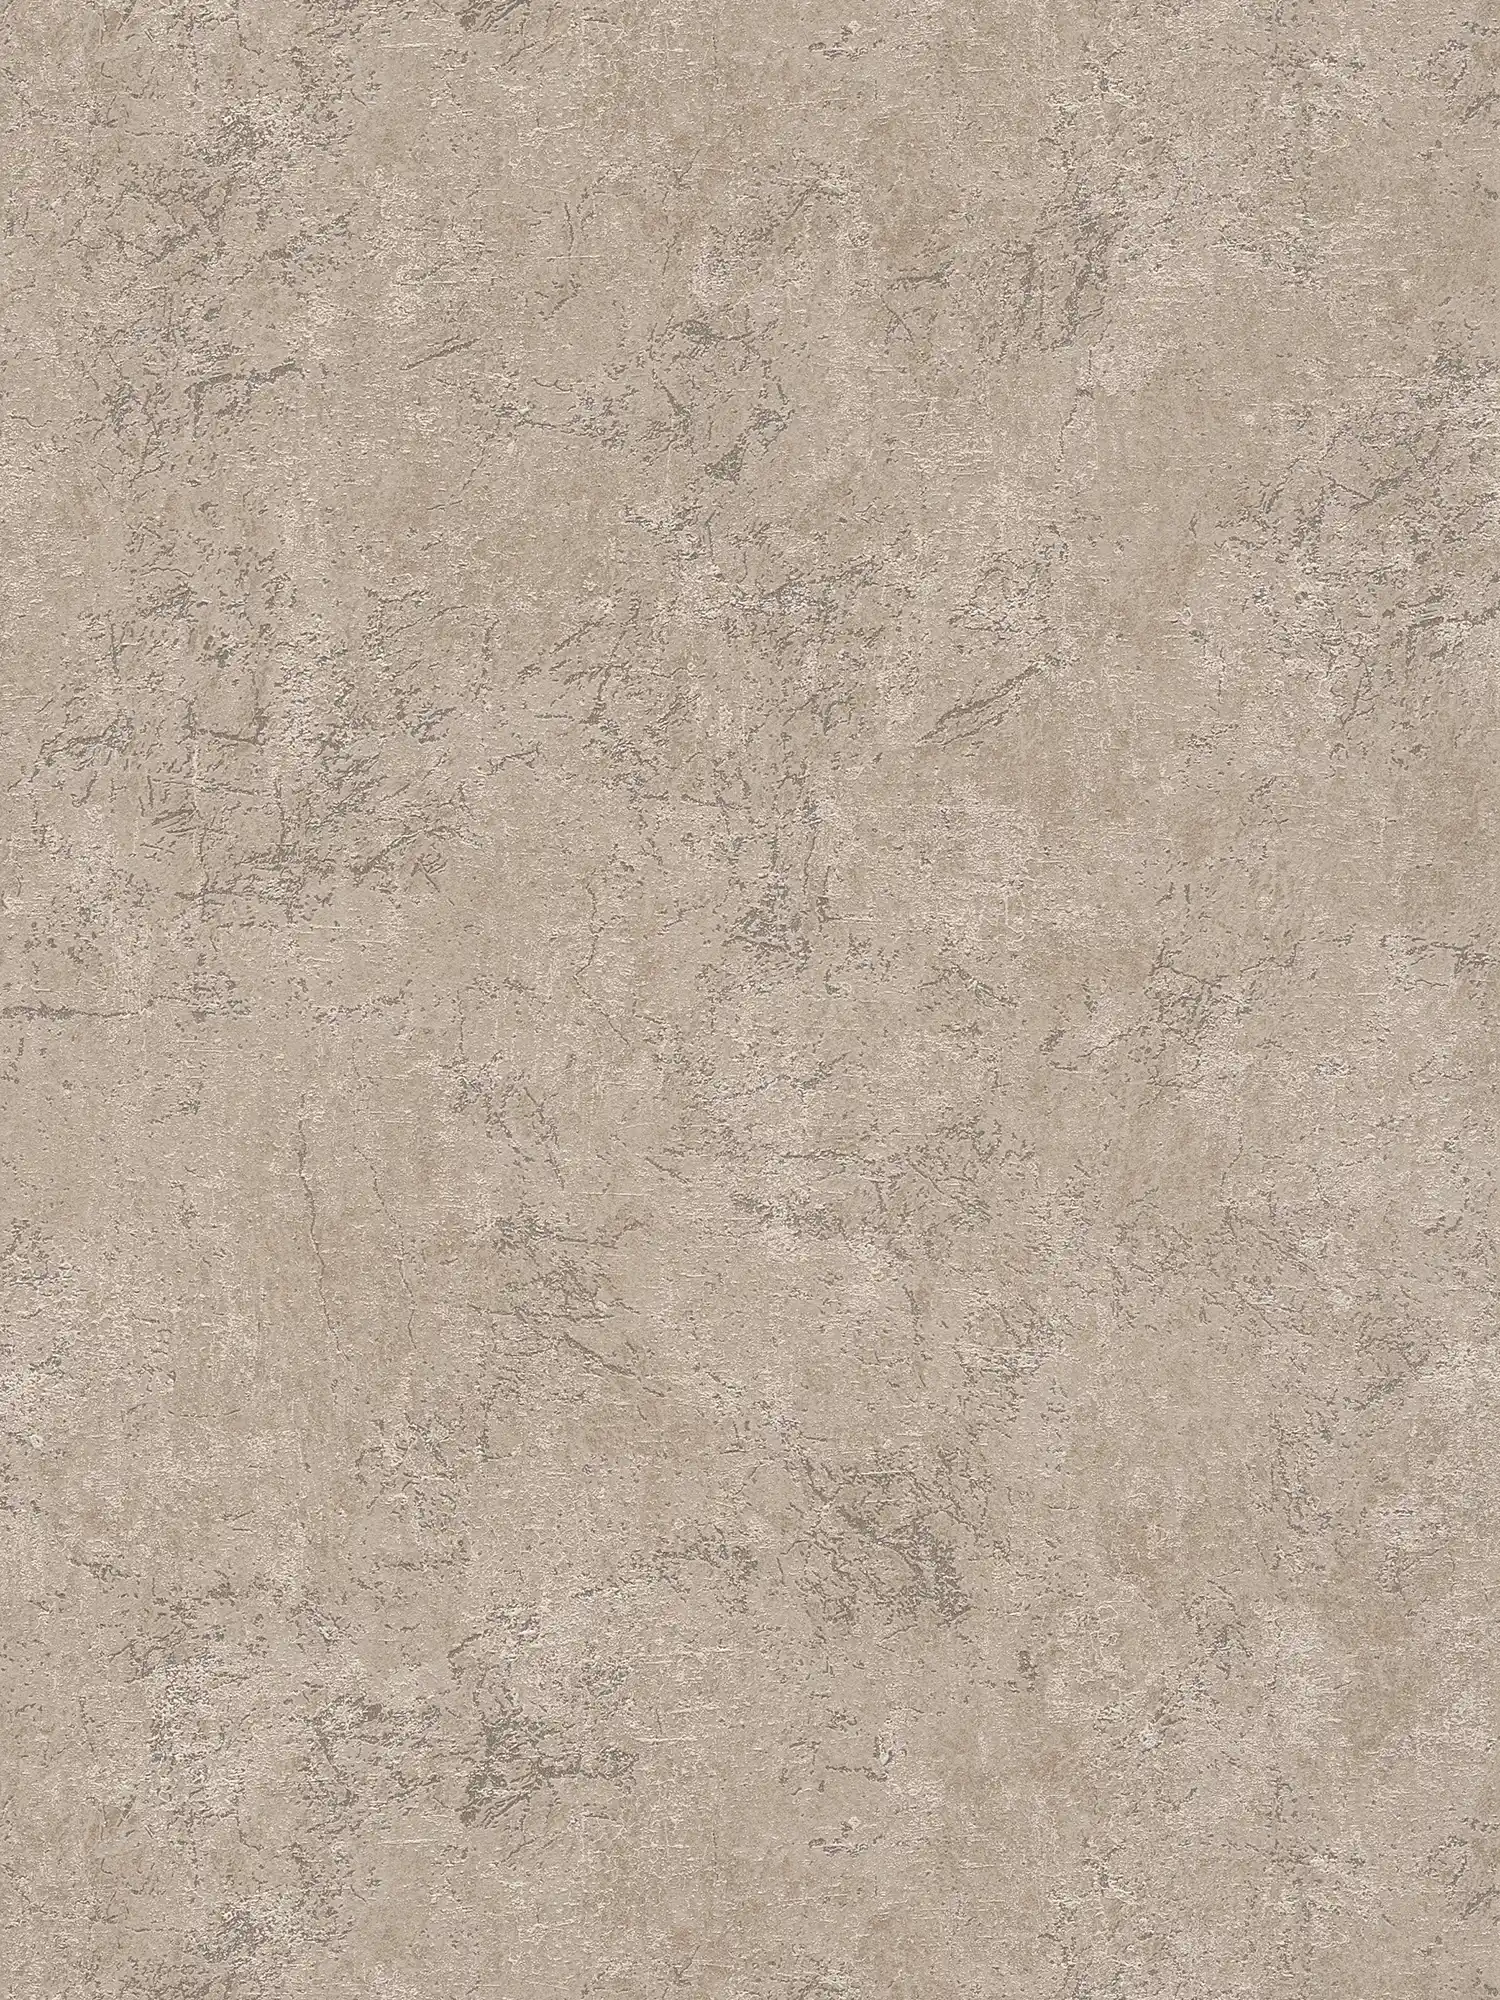 Wallpaper stone look with marbled surface
